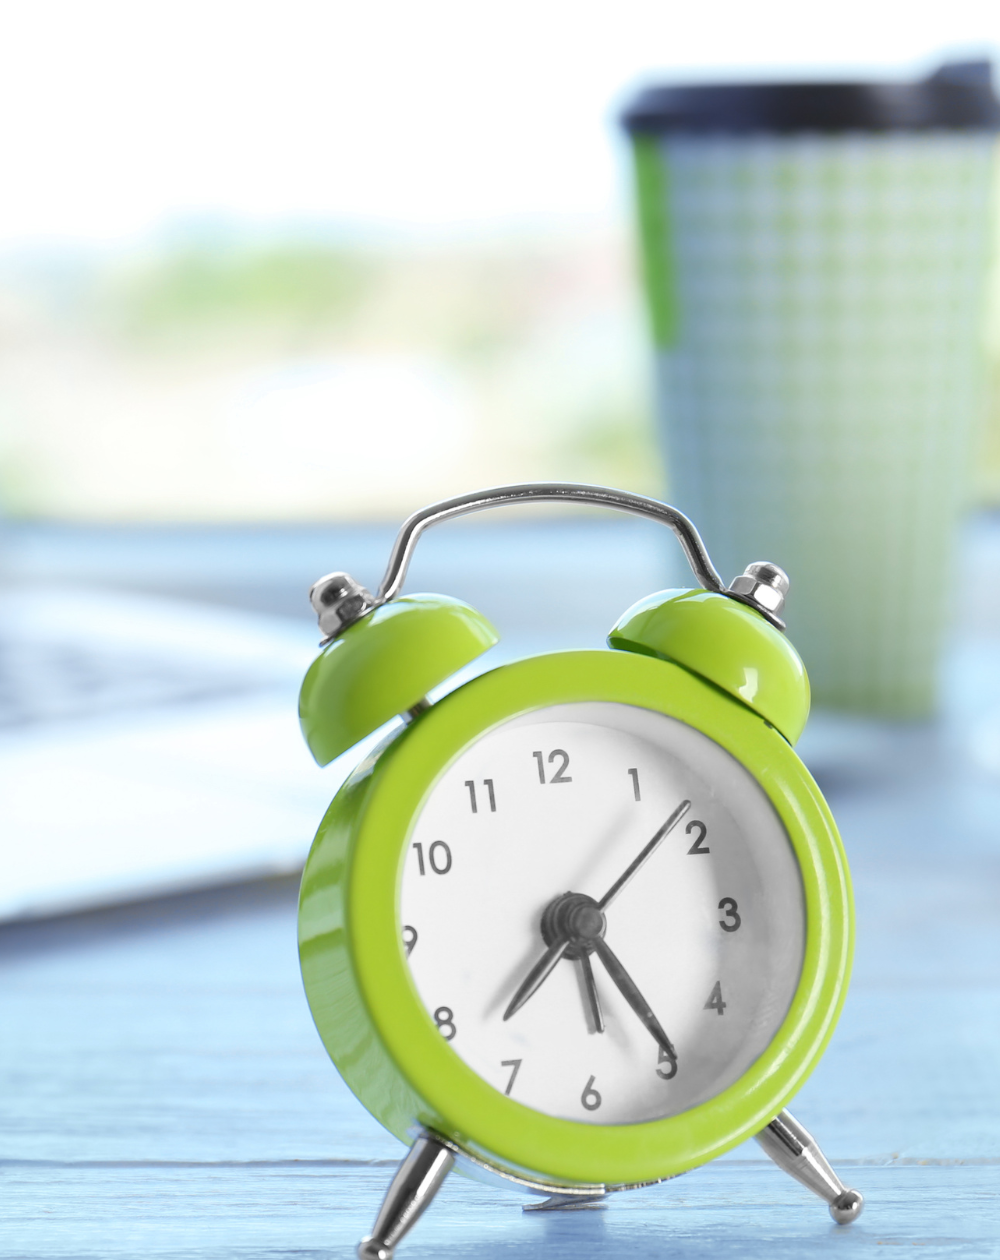 An illustrative image for a blog post about daily routines. In the foreground, a lime green alarm clock takes center stage on a well-kept desk, symbolizing the importance of time management in one's daily routine. In the background, a laptop, a delicious croissant, and a light blue disposable coffee cup hint at the elements that make up a morning ritual.